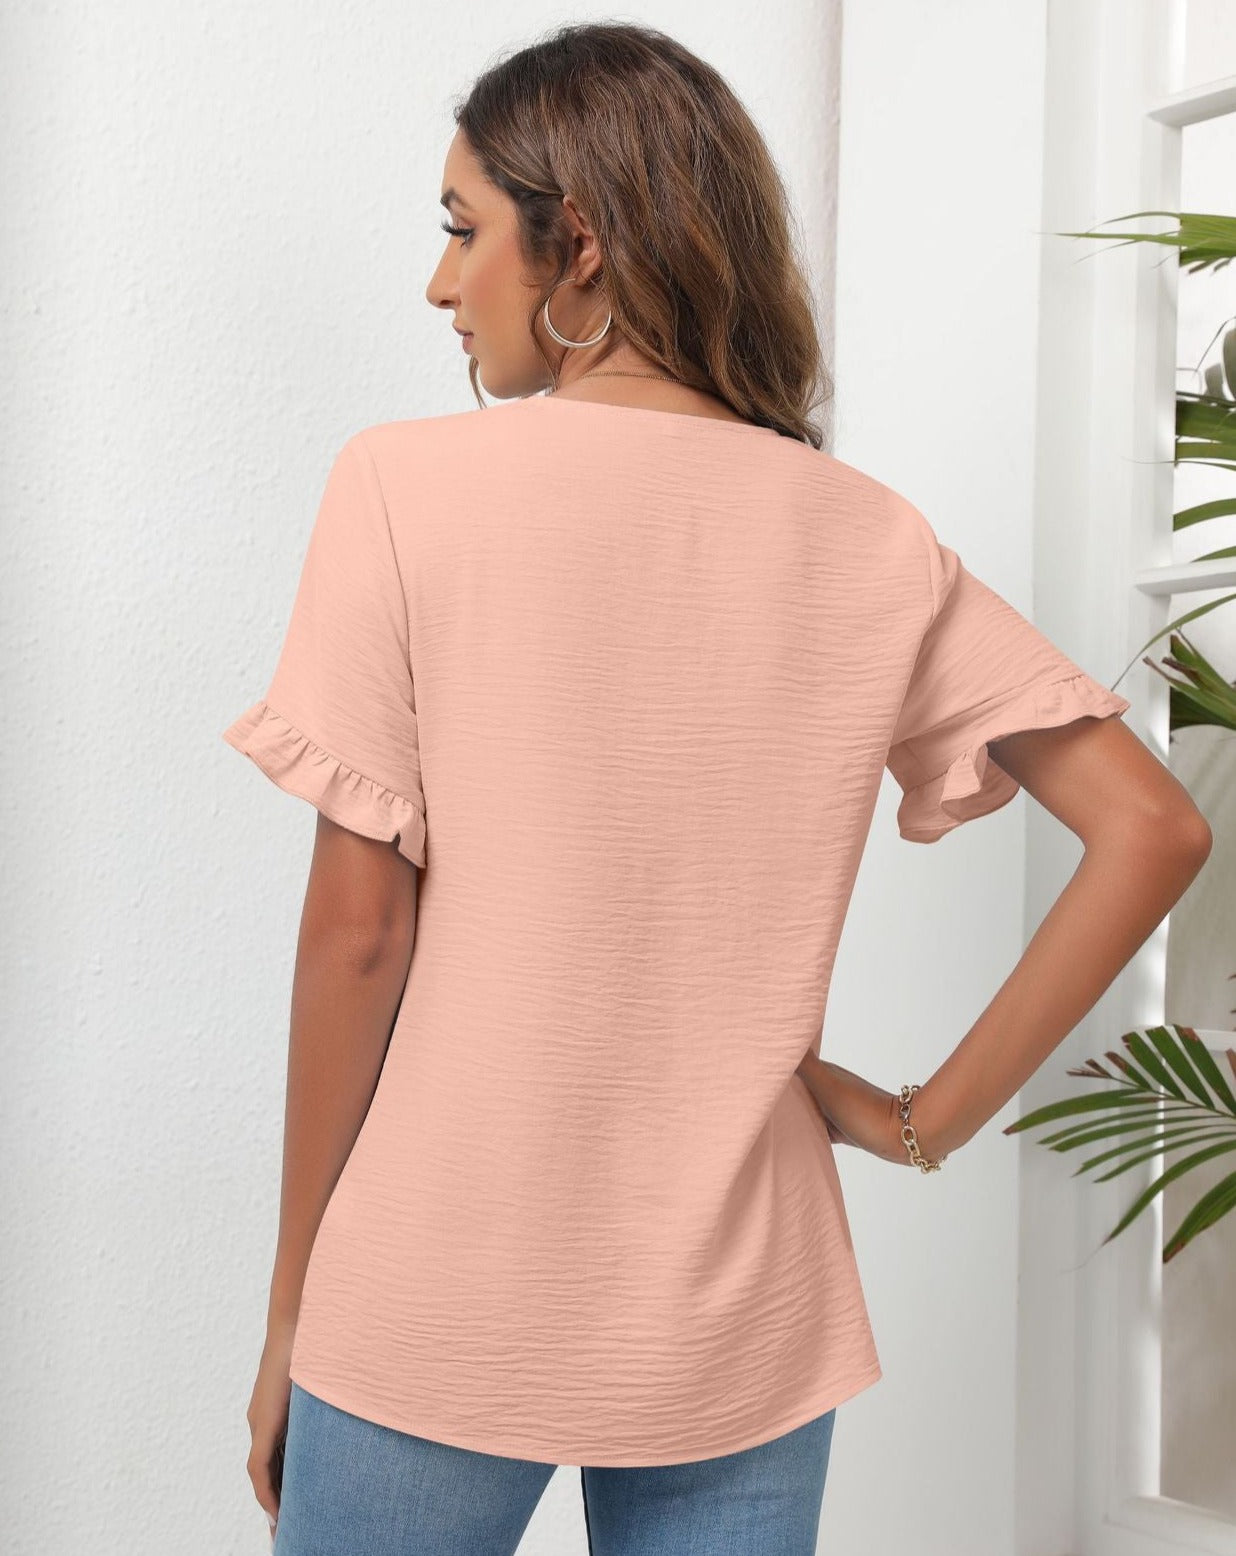 Solid Short Sleeve V Neck Buttons Down Blouse PInk